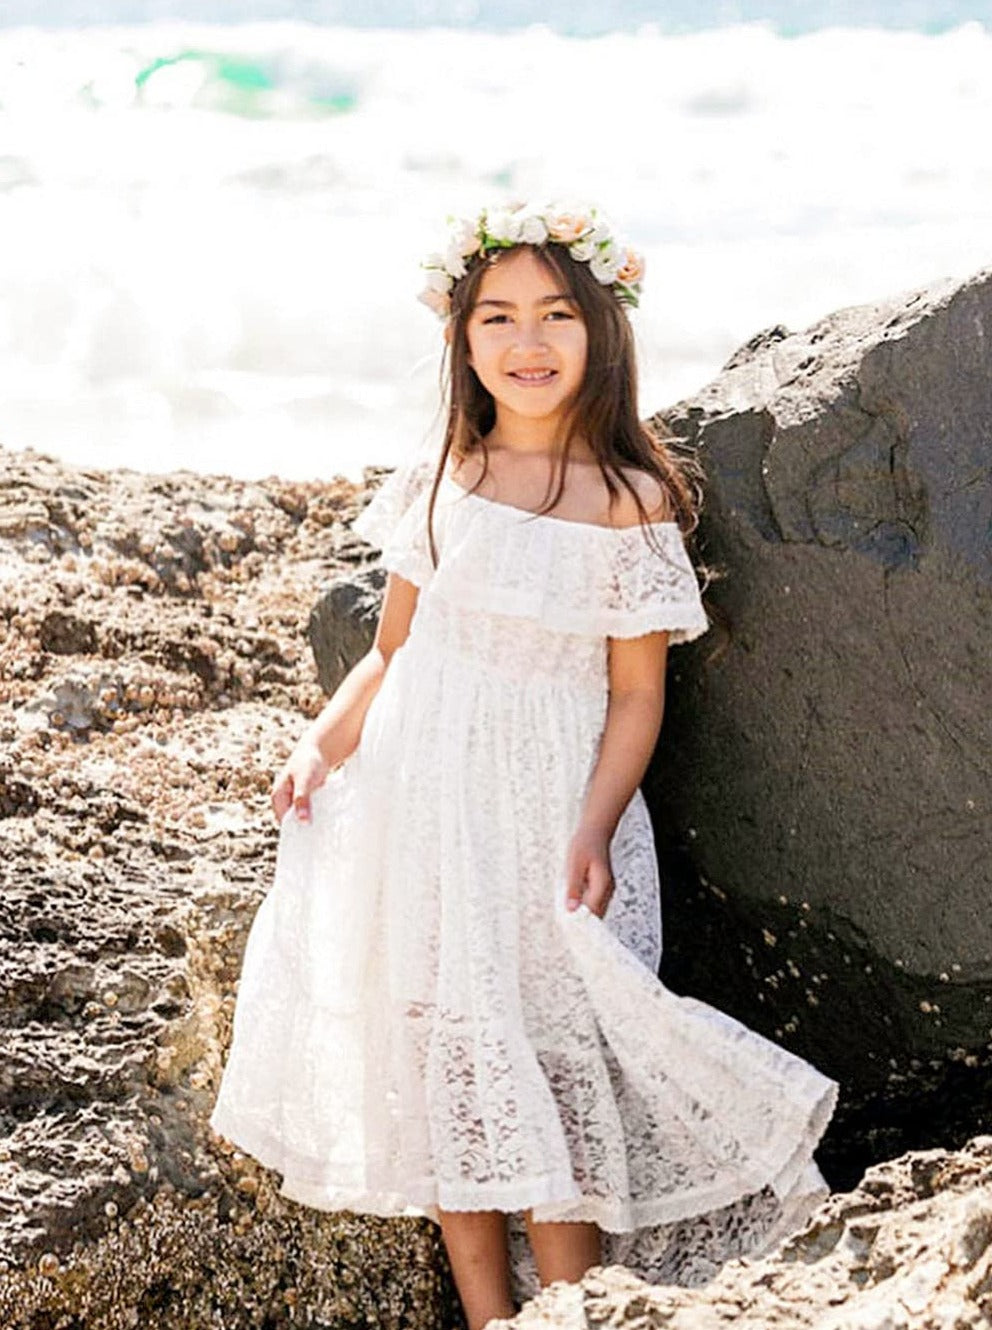 2Bunnies Flower Girl Dress Paisley All Lace Off Shoulder Maxi (White) - 2BUNNIES